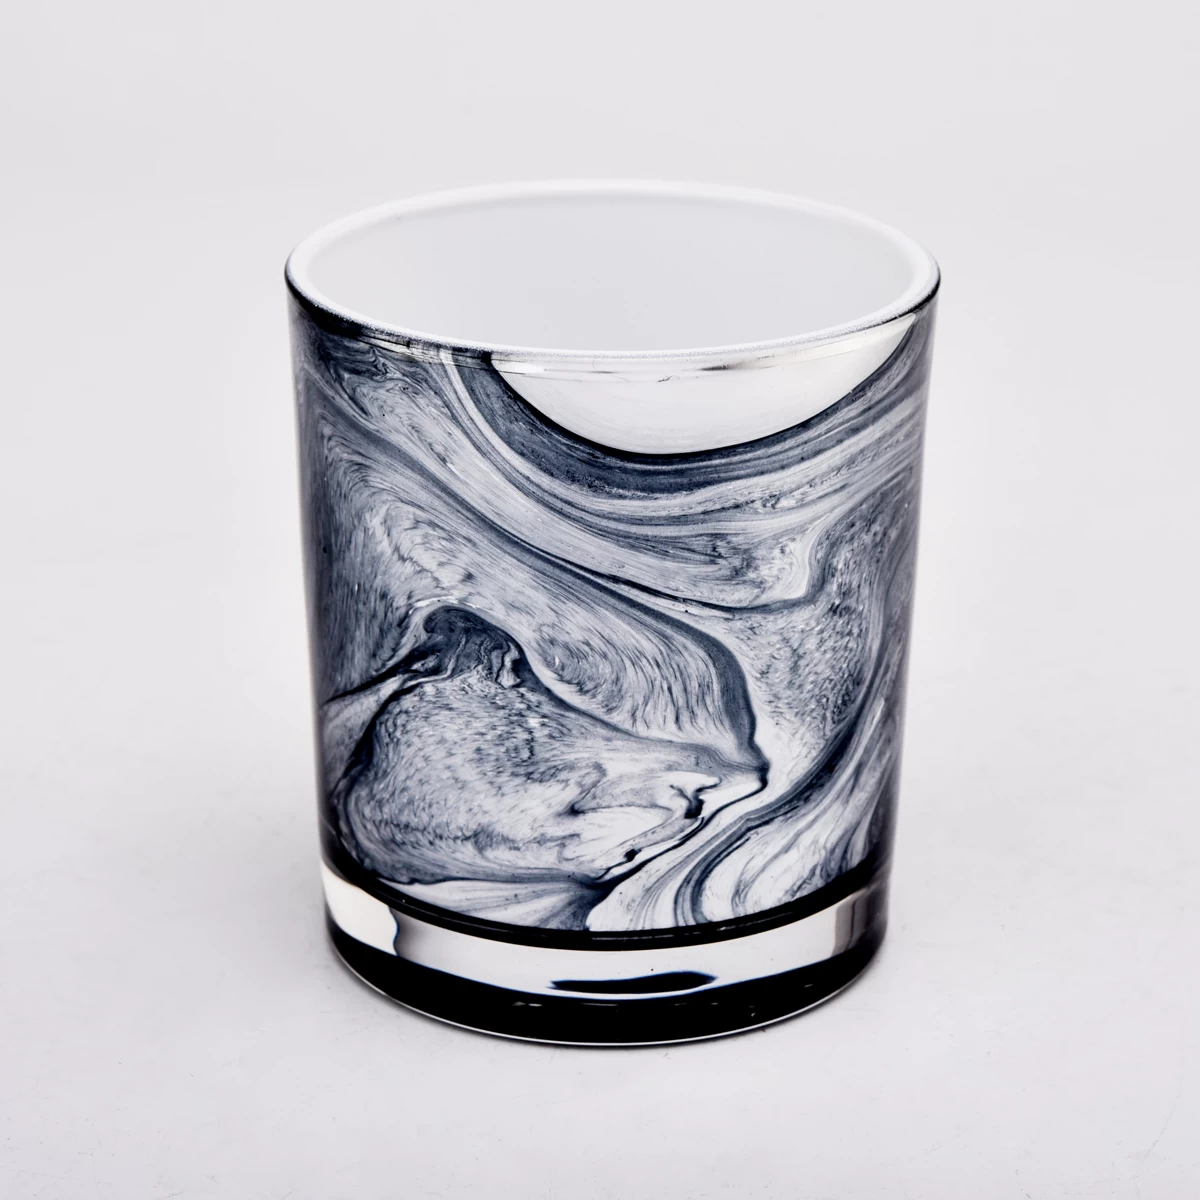 Luxury hand paint artwork glass candle holder